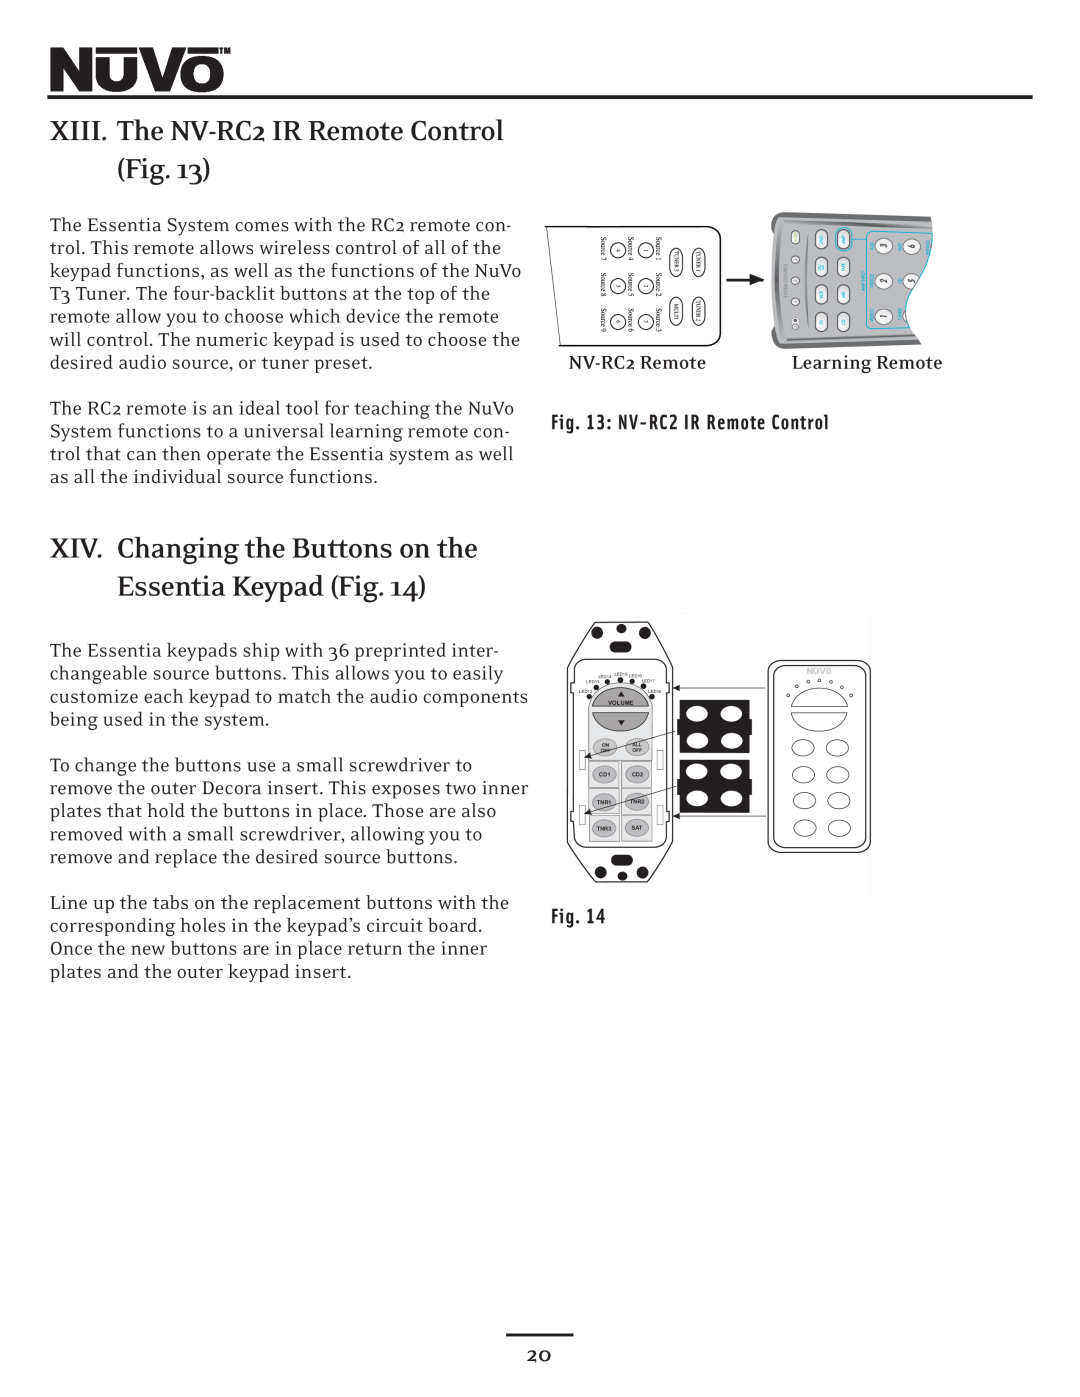 Nuvo NV-E6DXS XIV. Changing the Buttons on the, Essentia Keypad Fig, XIII. The NV-RC2IR Remote Control, NV-RC2Remote 